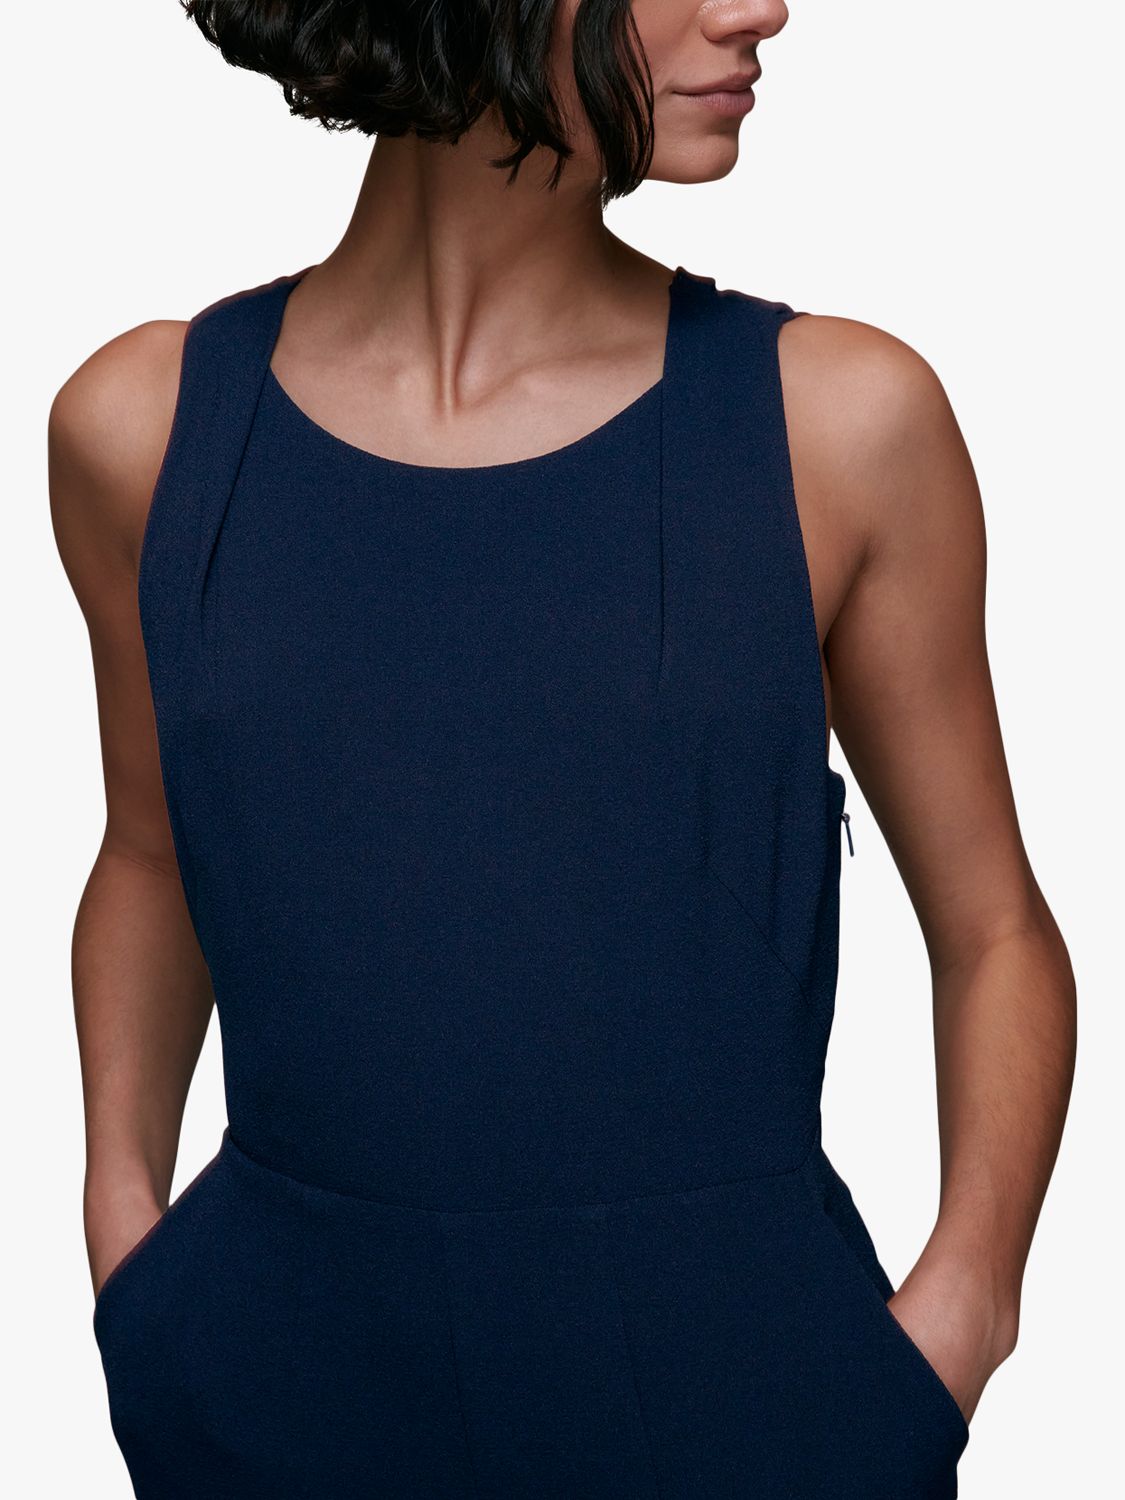 Buy Whistles Tie Back Maxi Jumpsuit, Navy Online at johnlewis.com